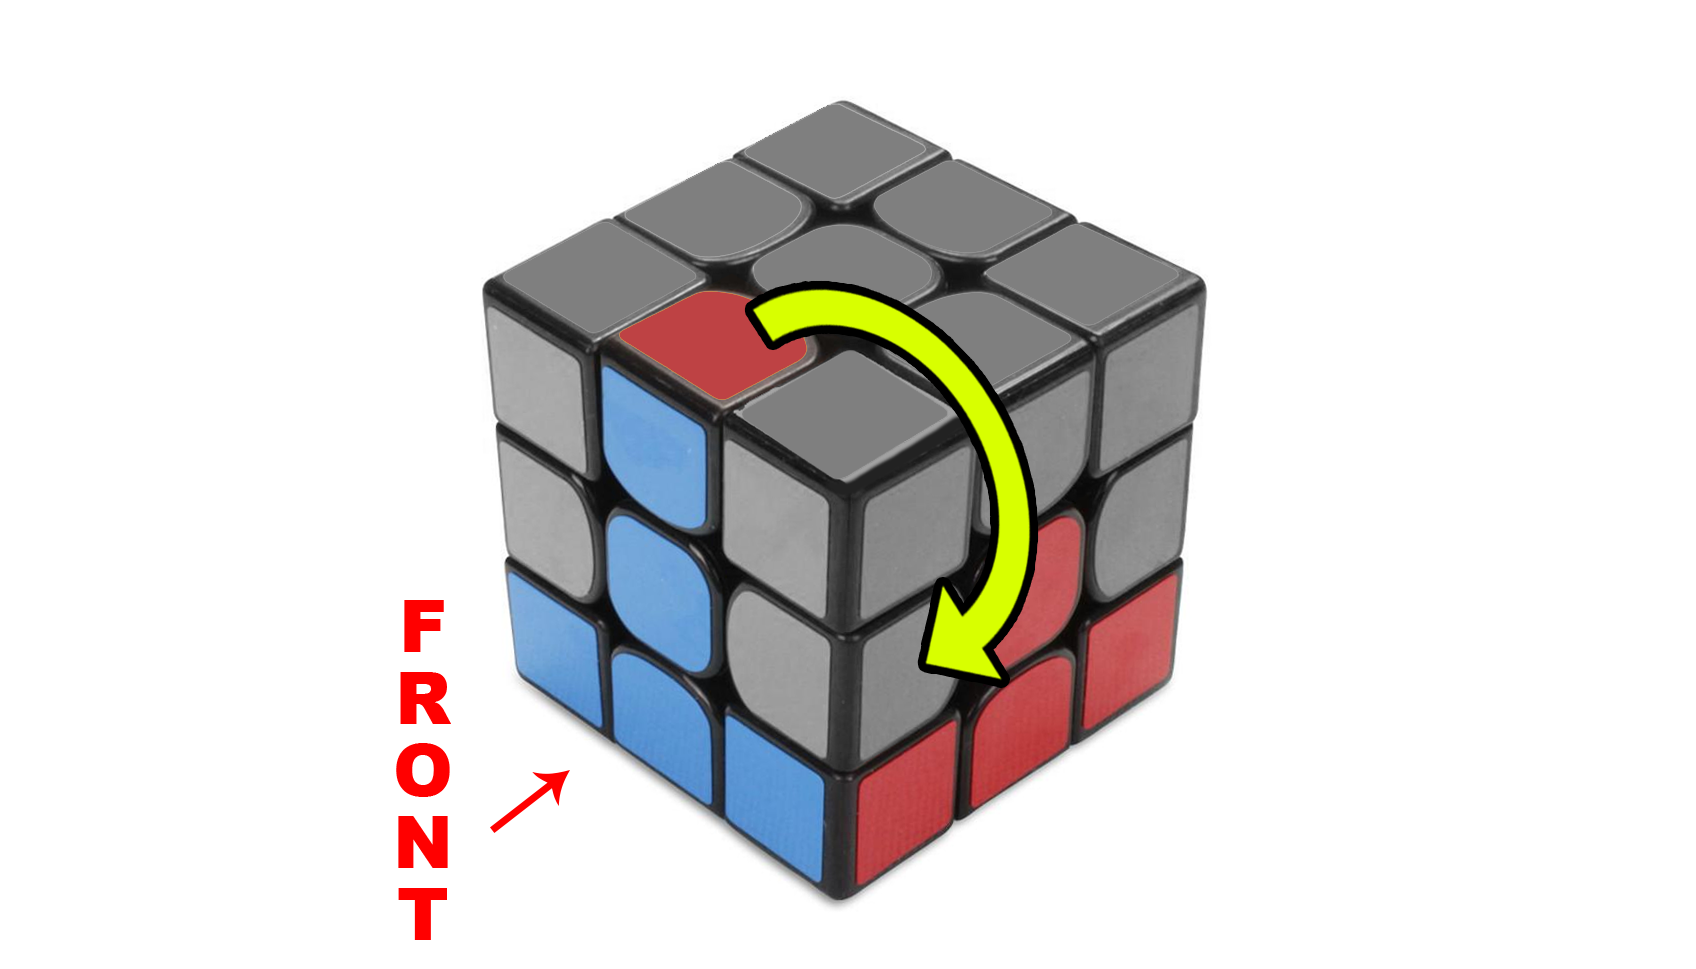 cube clipart solved